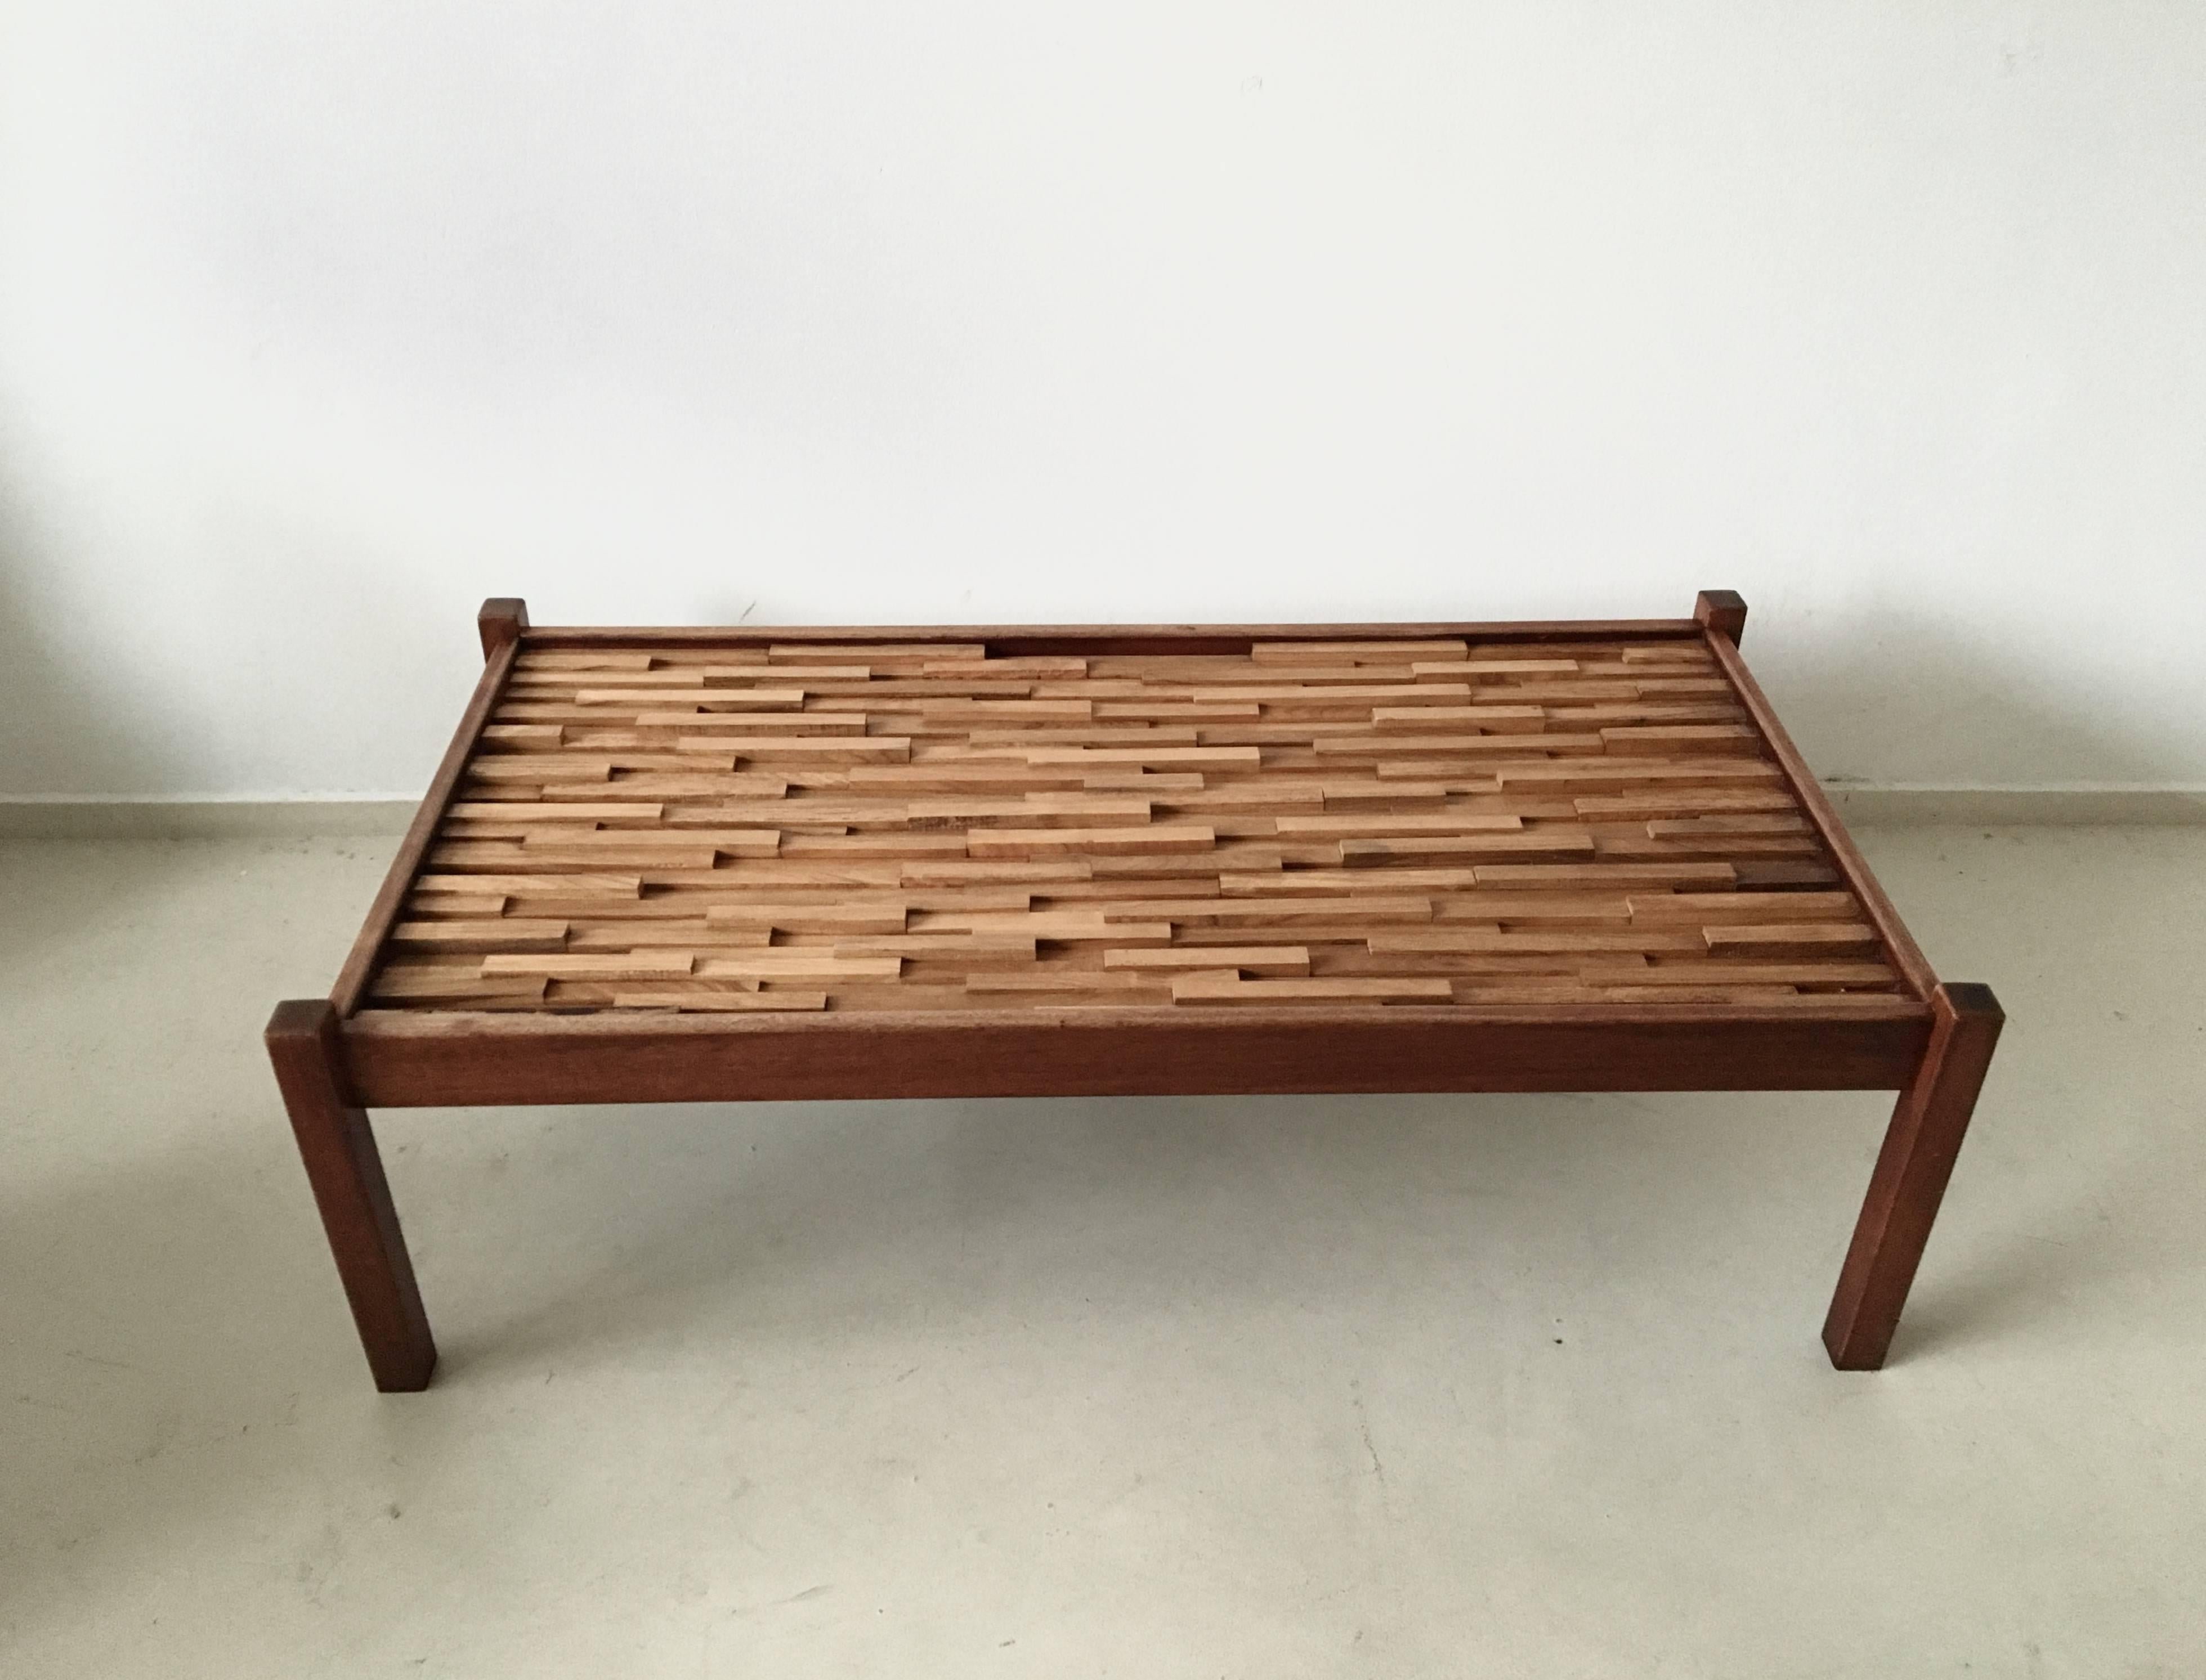 This coffee table was designed by Percival Lafer. It was manufactured in Brazil in the 1960s. The frame is made from rosewood and under the glass table top, there are also small strokes of jacaranda wood. This table is in a good vintage condition